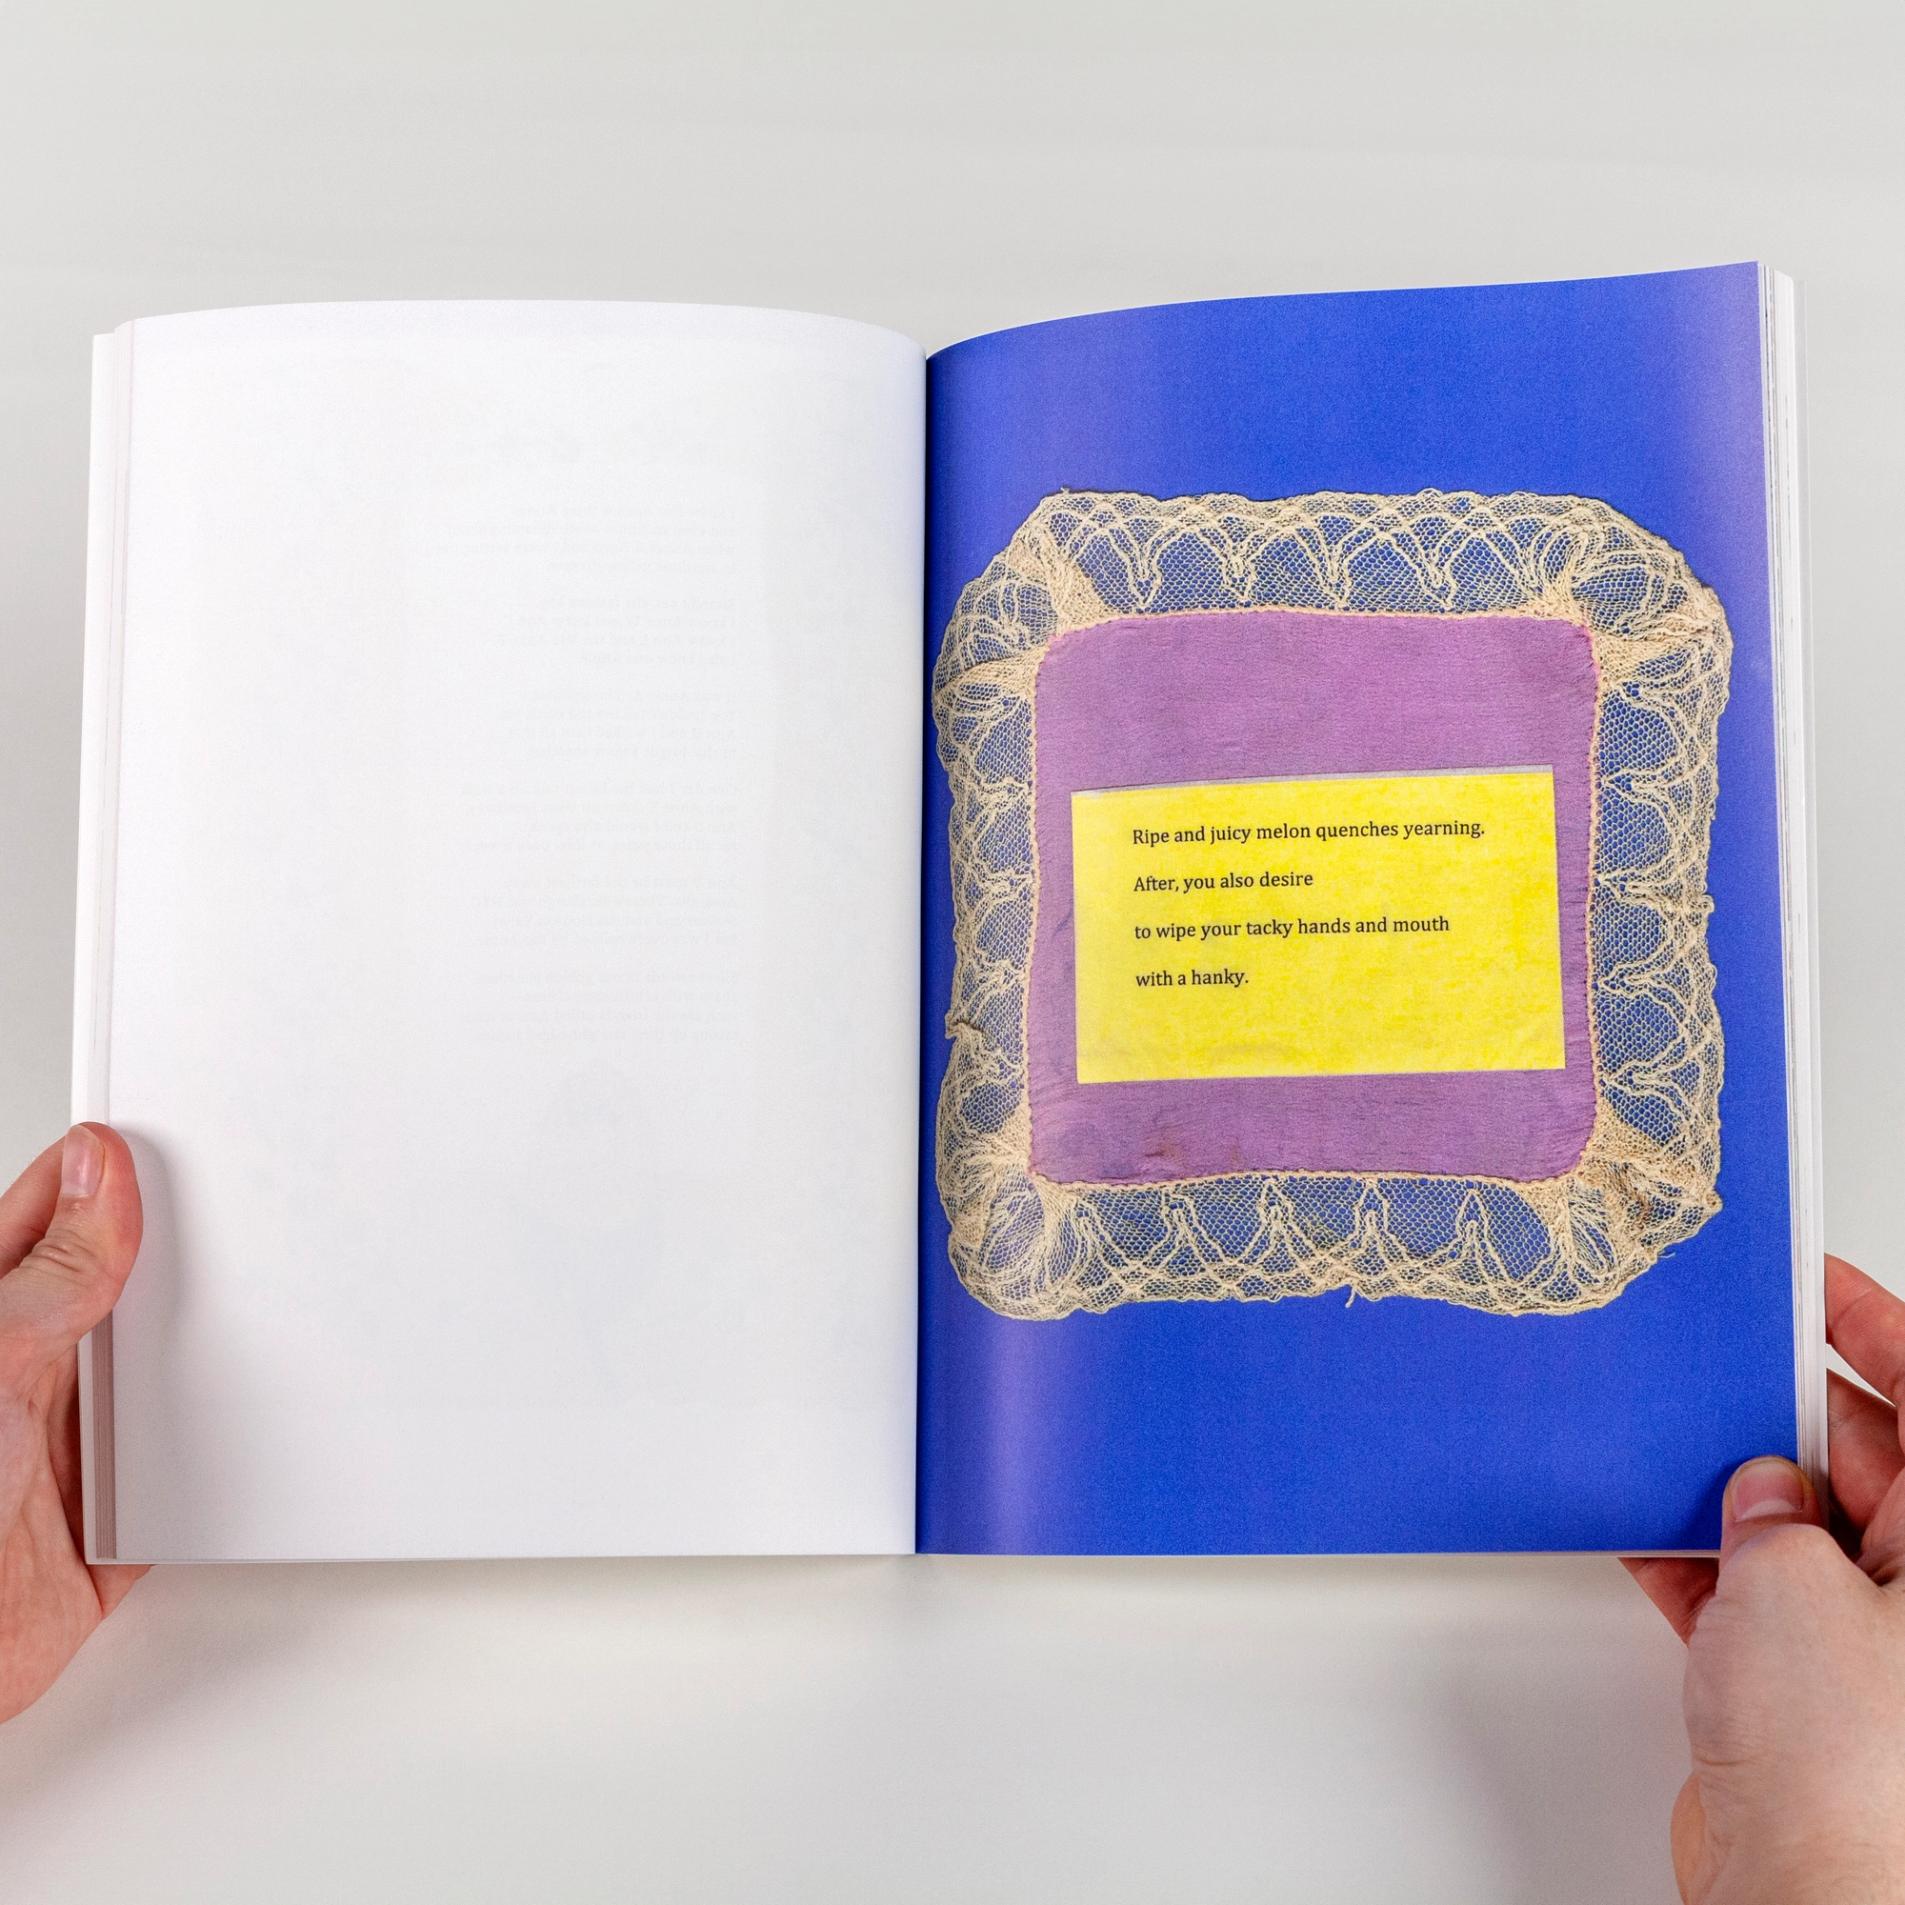 A photo of a person holding a book open. The left side of the page is blank white and the right side of the page has a royal blue background. There is a purple handkerchief with a cream, laced border. In the center there is a typed poem.